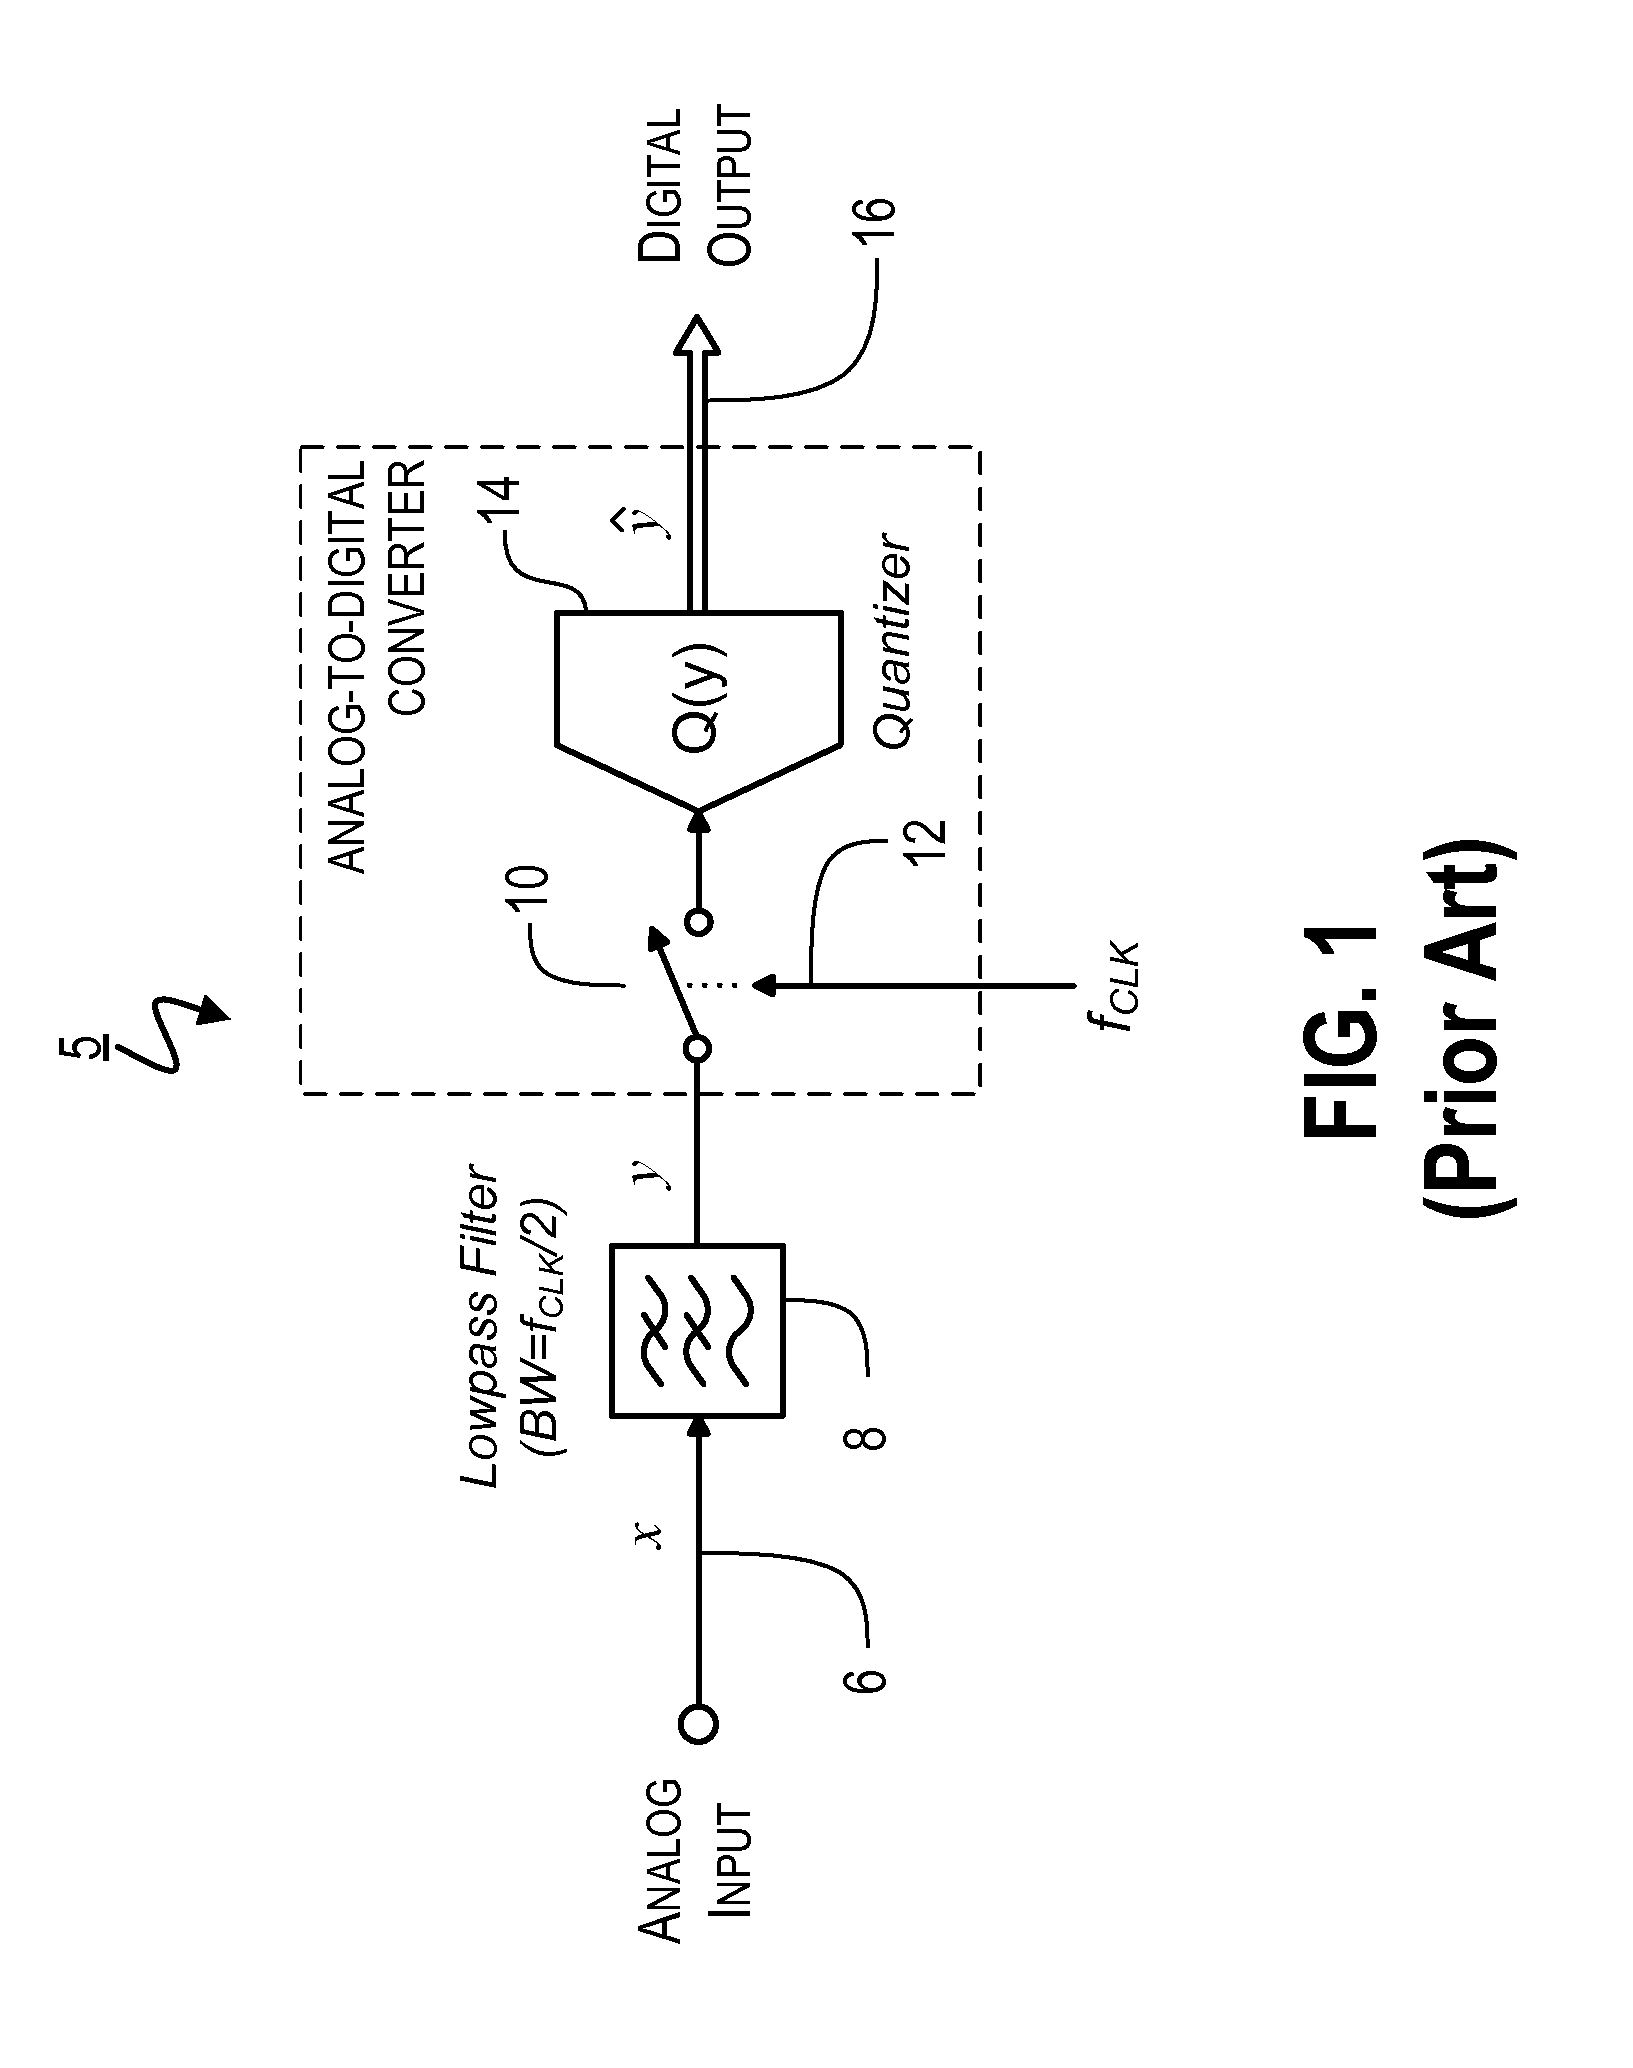 Apparatuses and Methods for Linear to Discrete Quantization Conversion with Reduced Sampling-Variation Errors